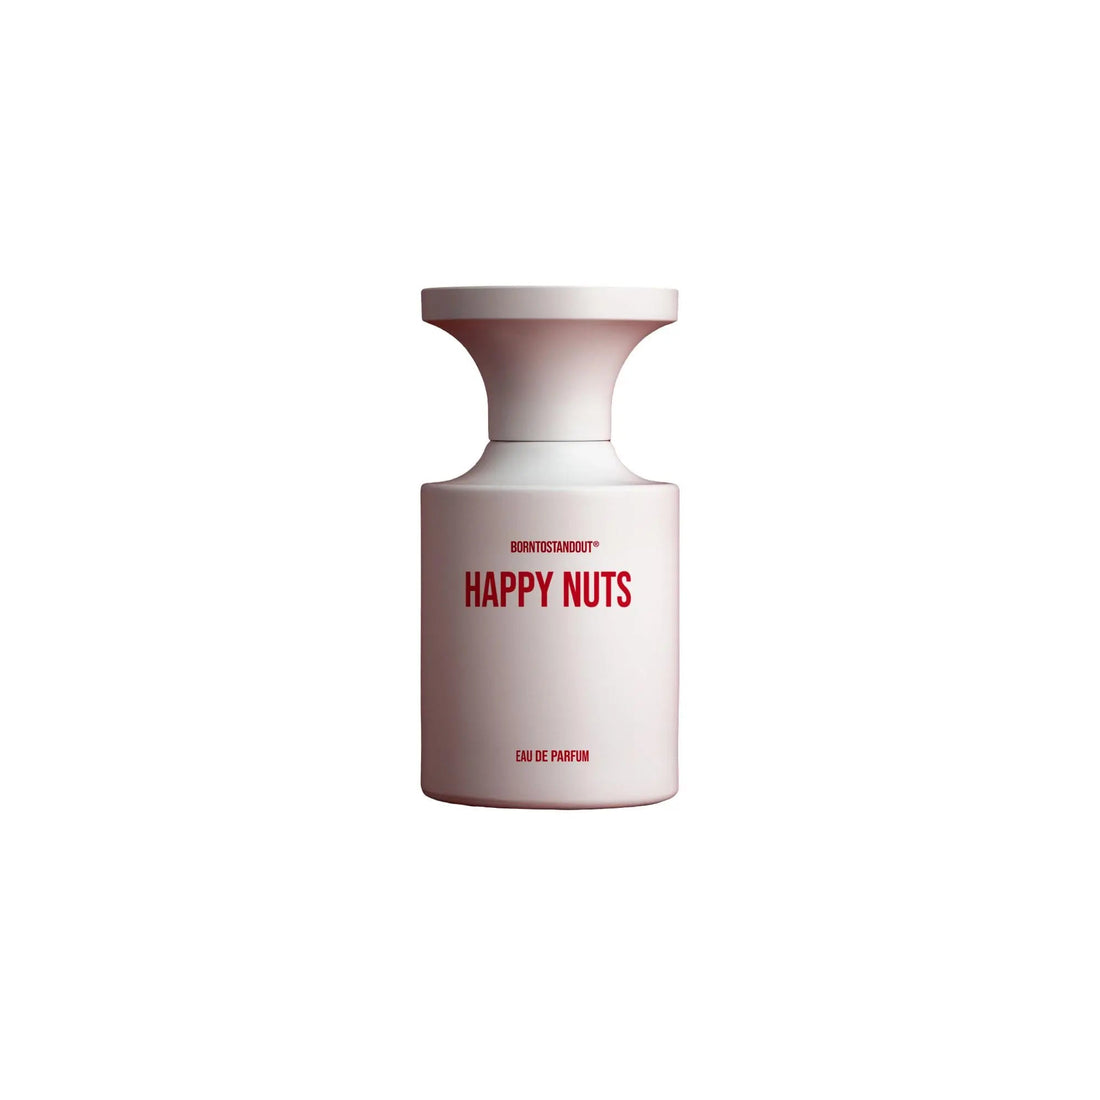 Born to stand out Happy Nuts - 50ml